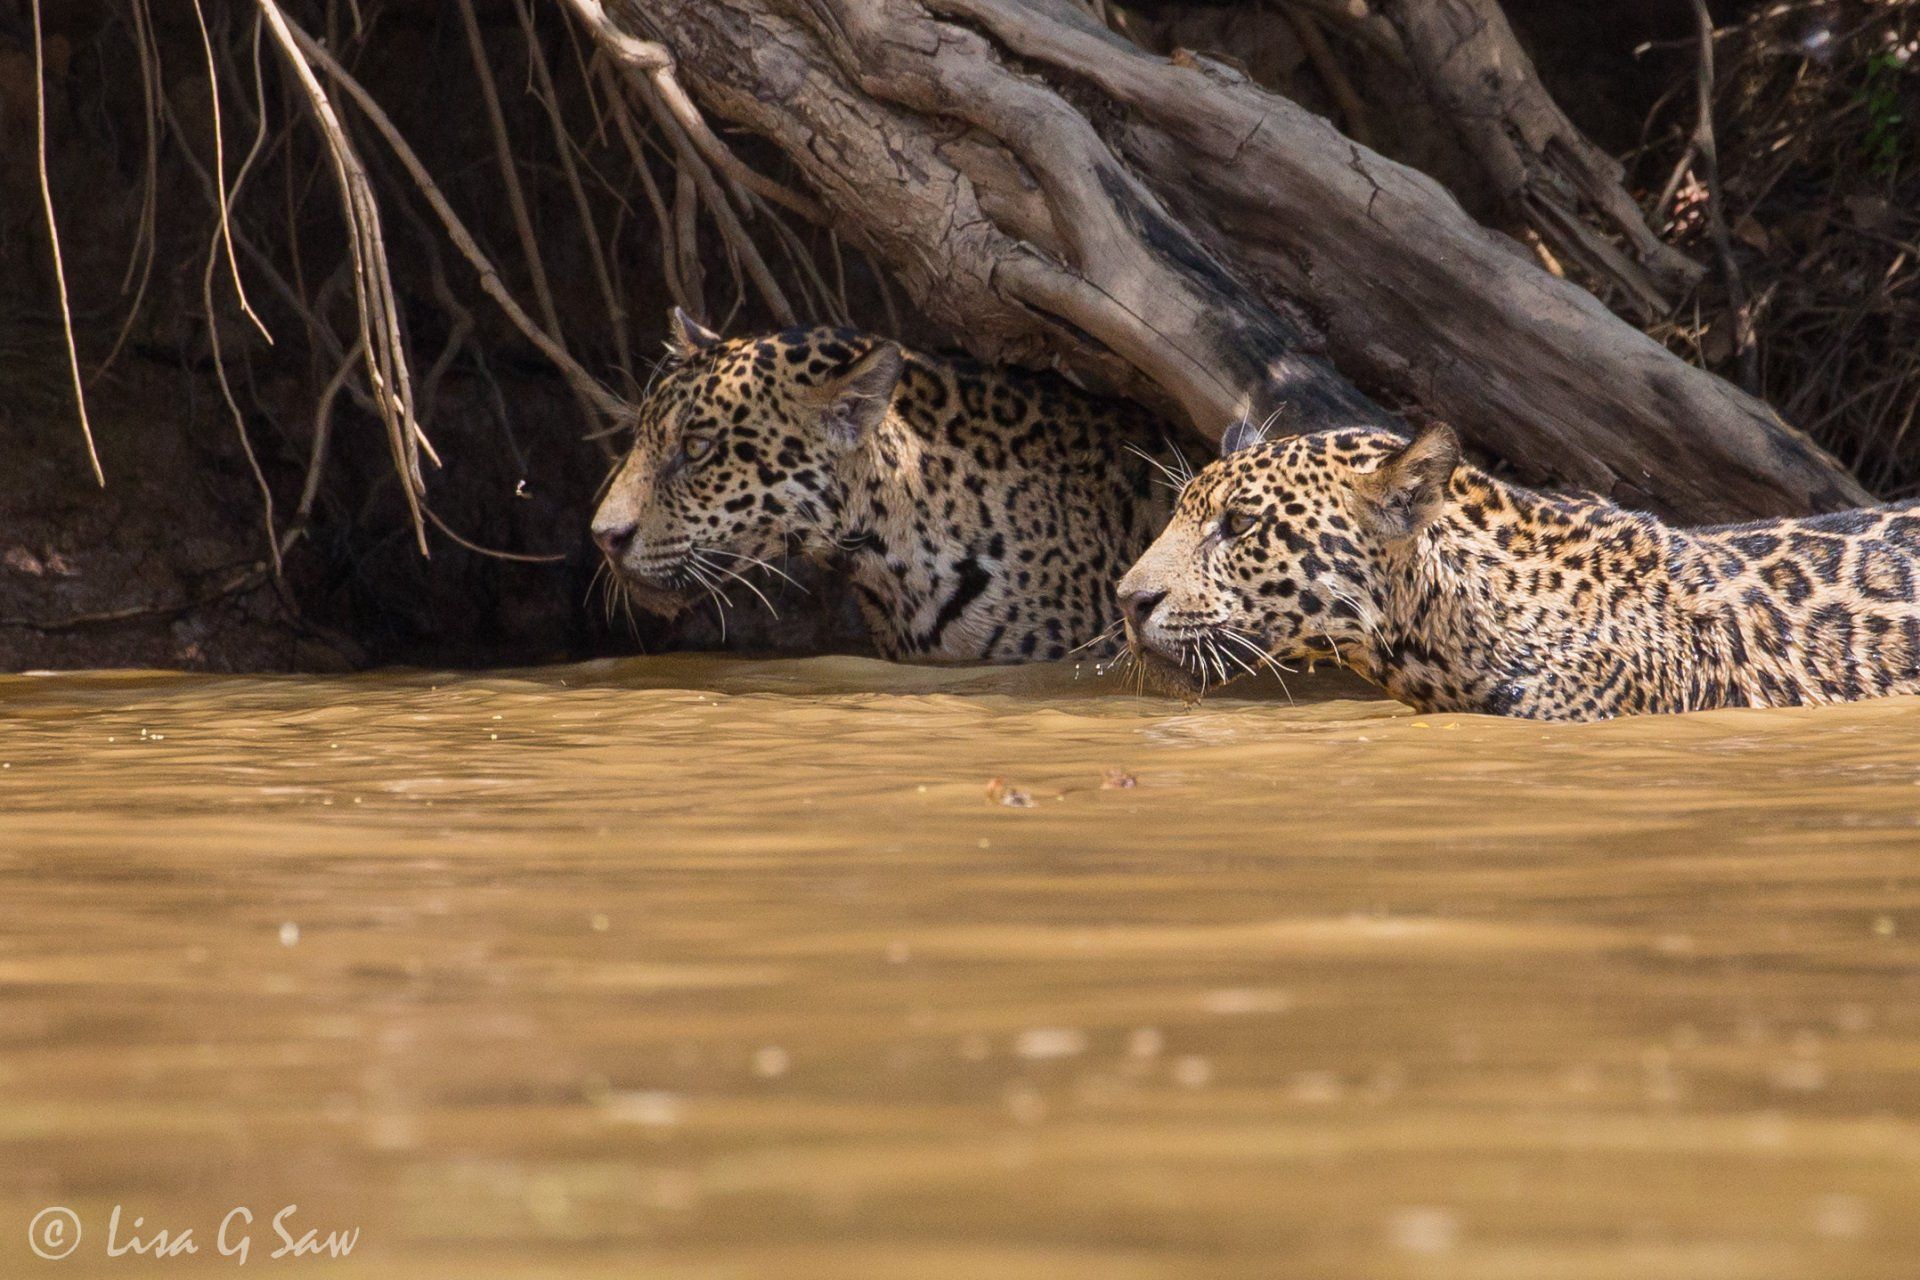 Two Jaguar brothers in water alongside each other